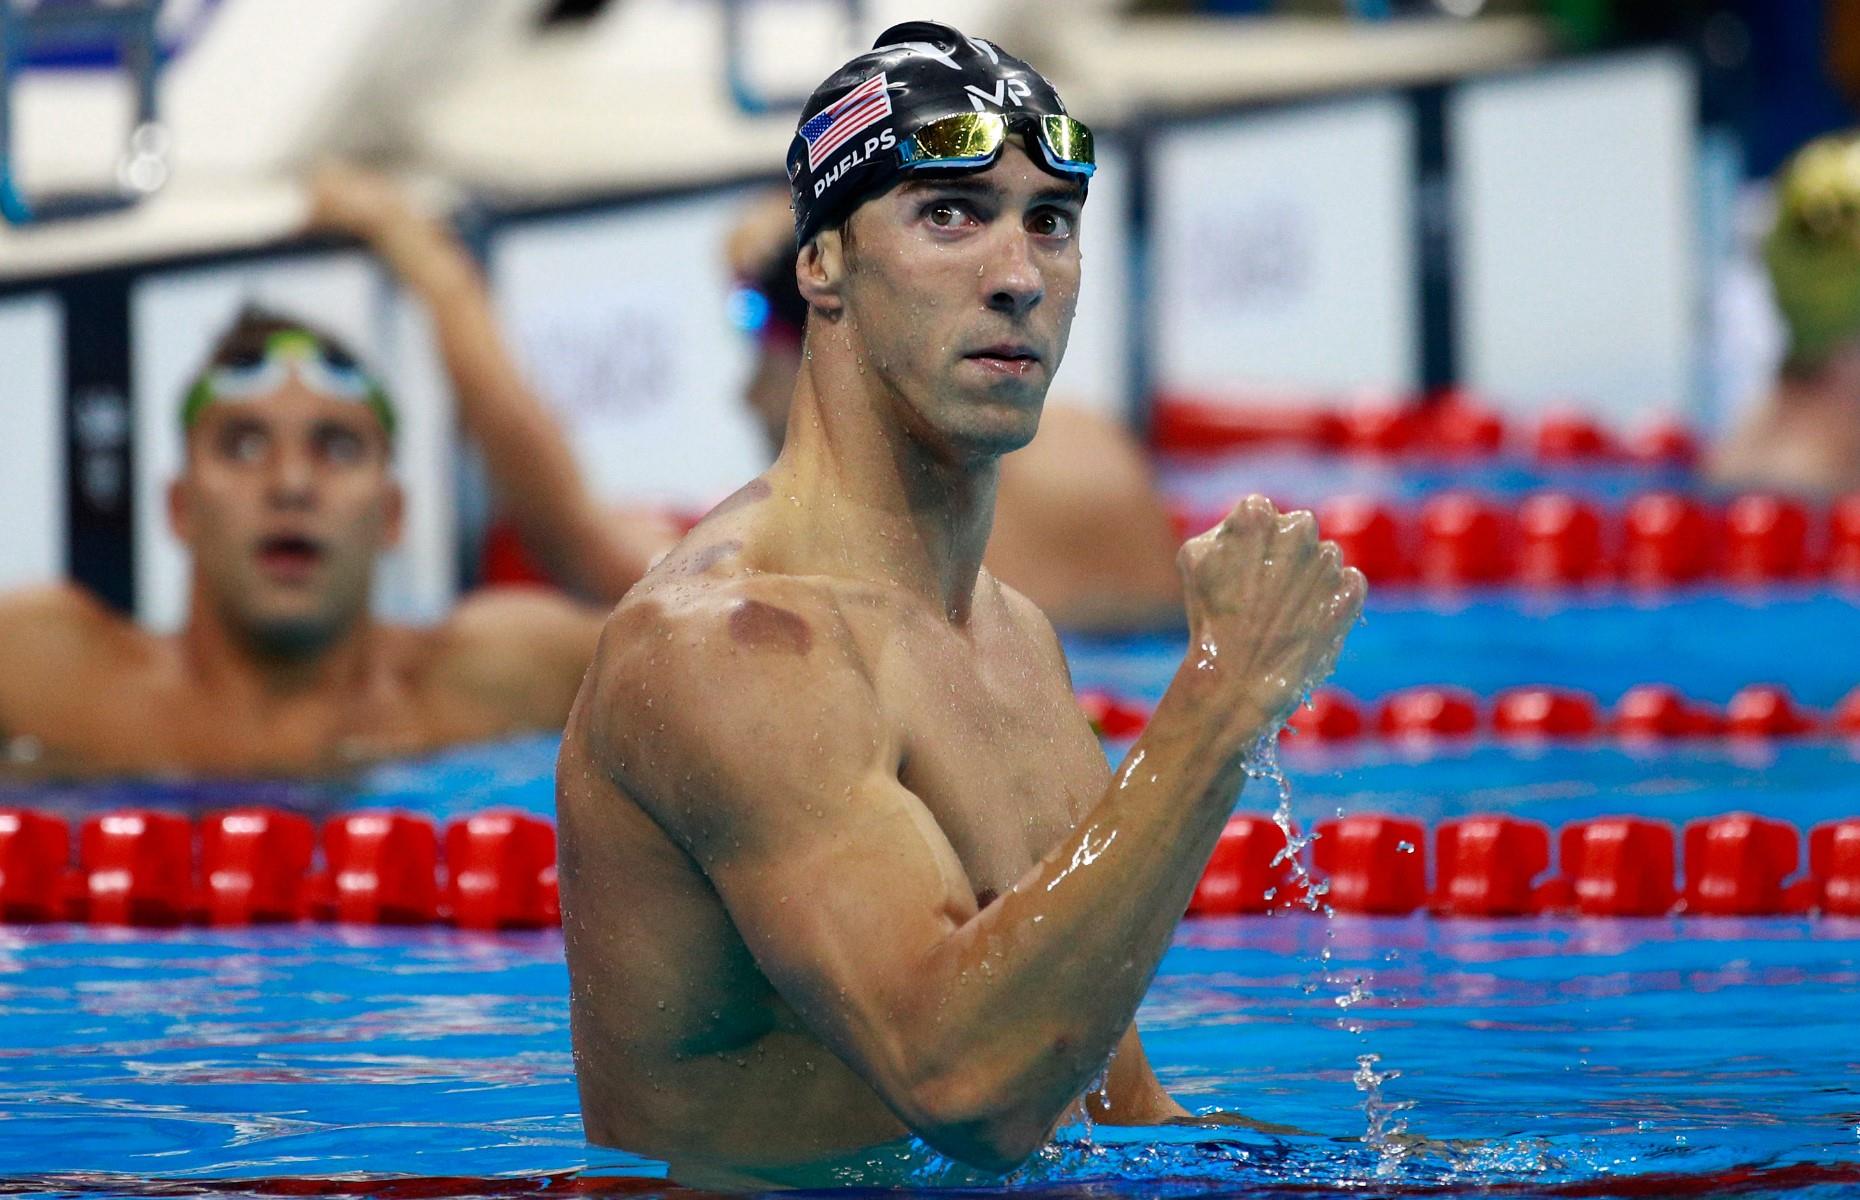 Michael Phelps – Take ‘can’t’ out of your vocabulary